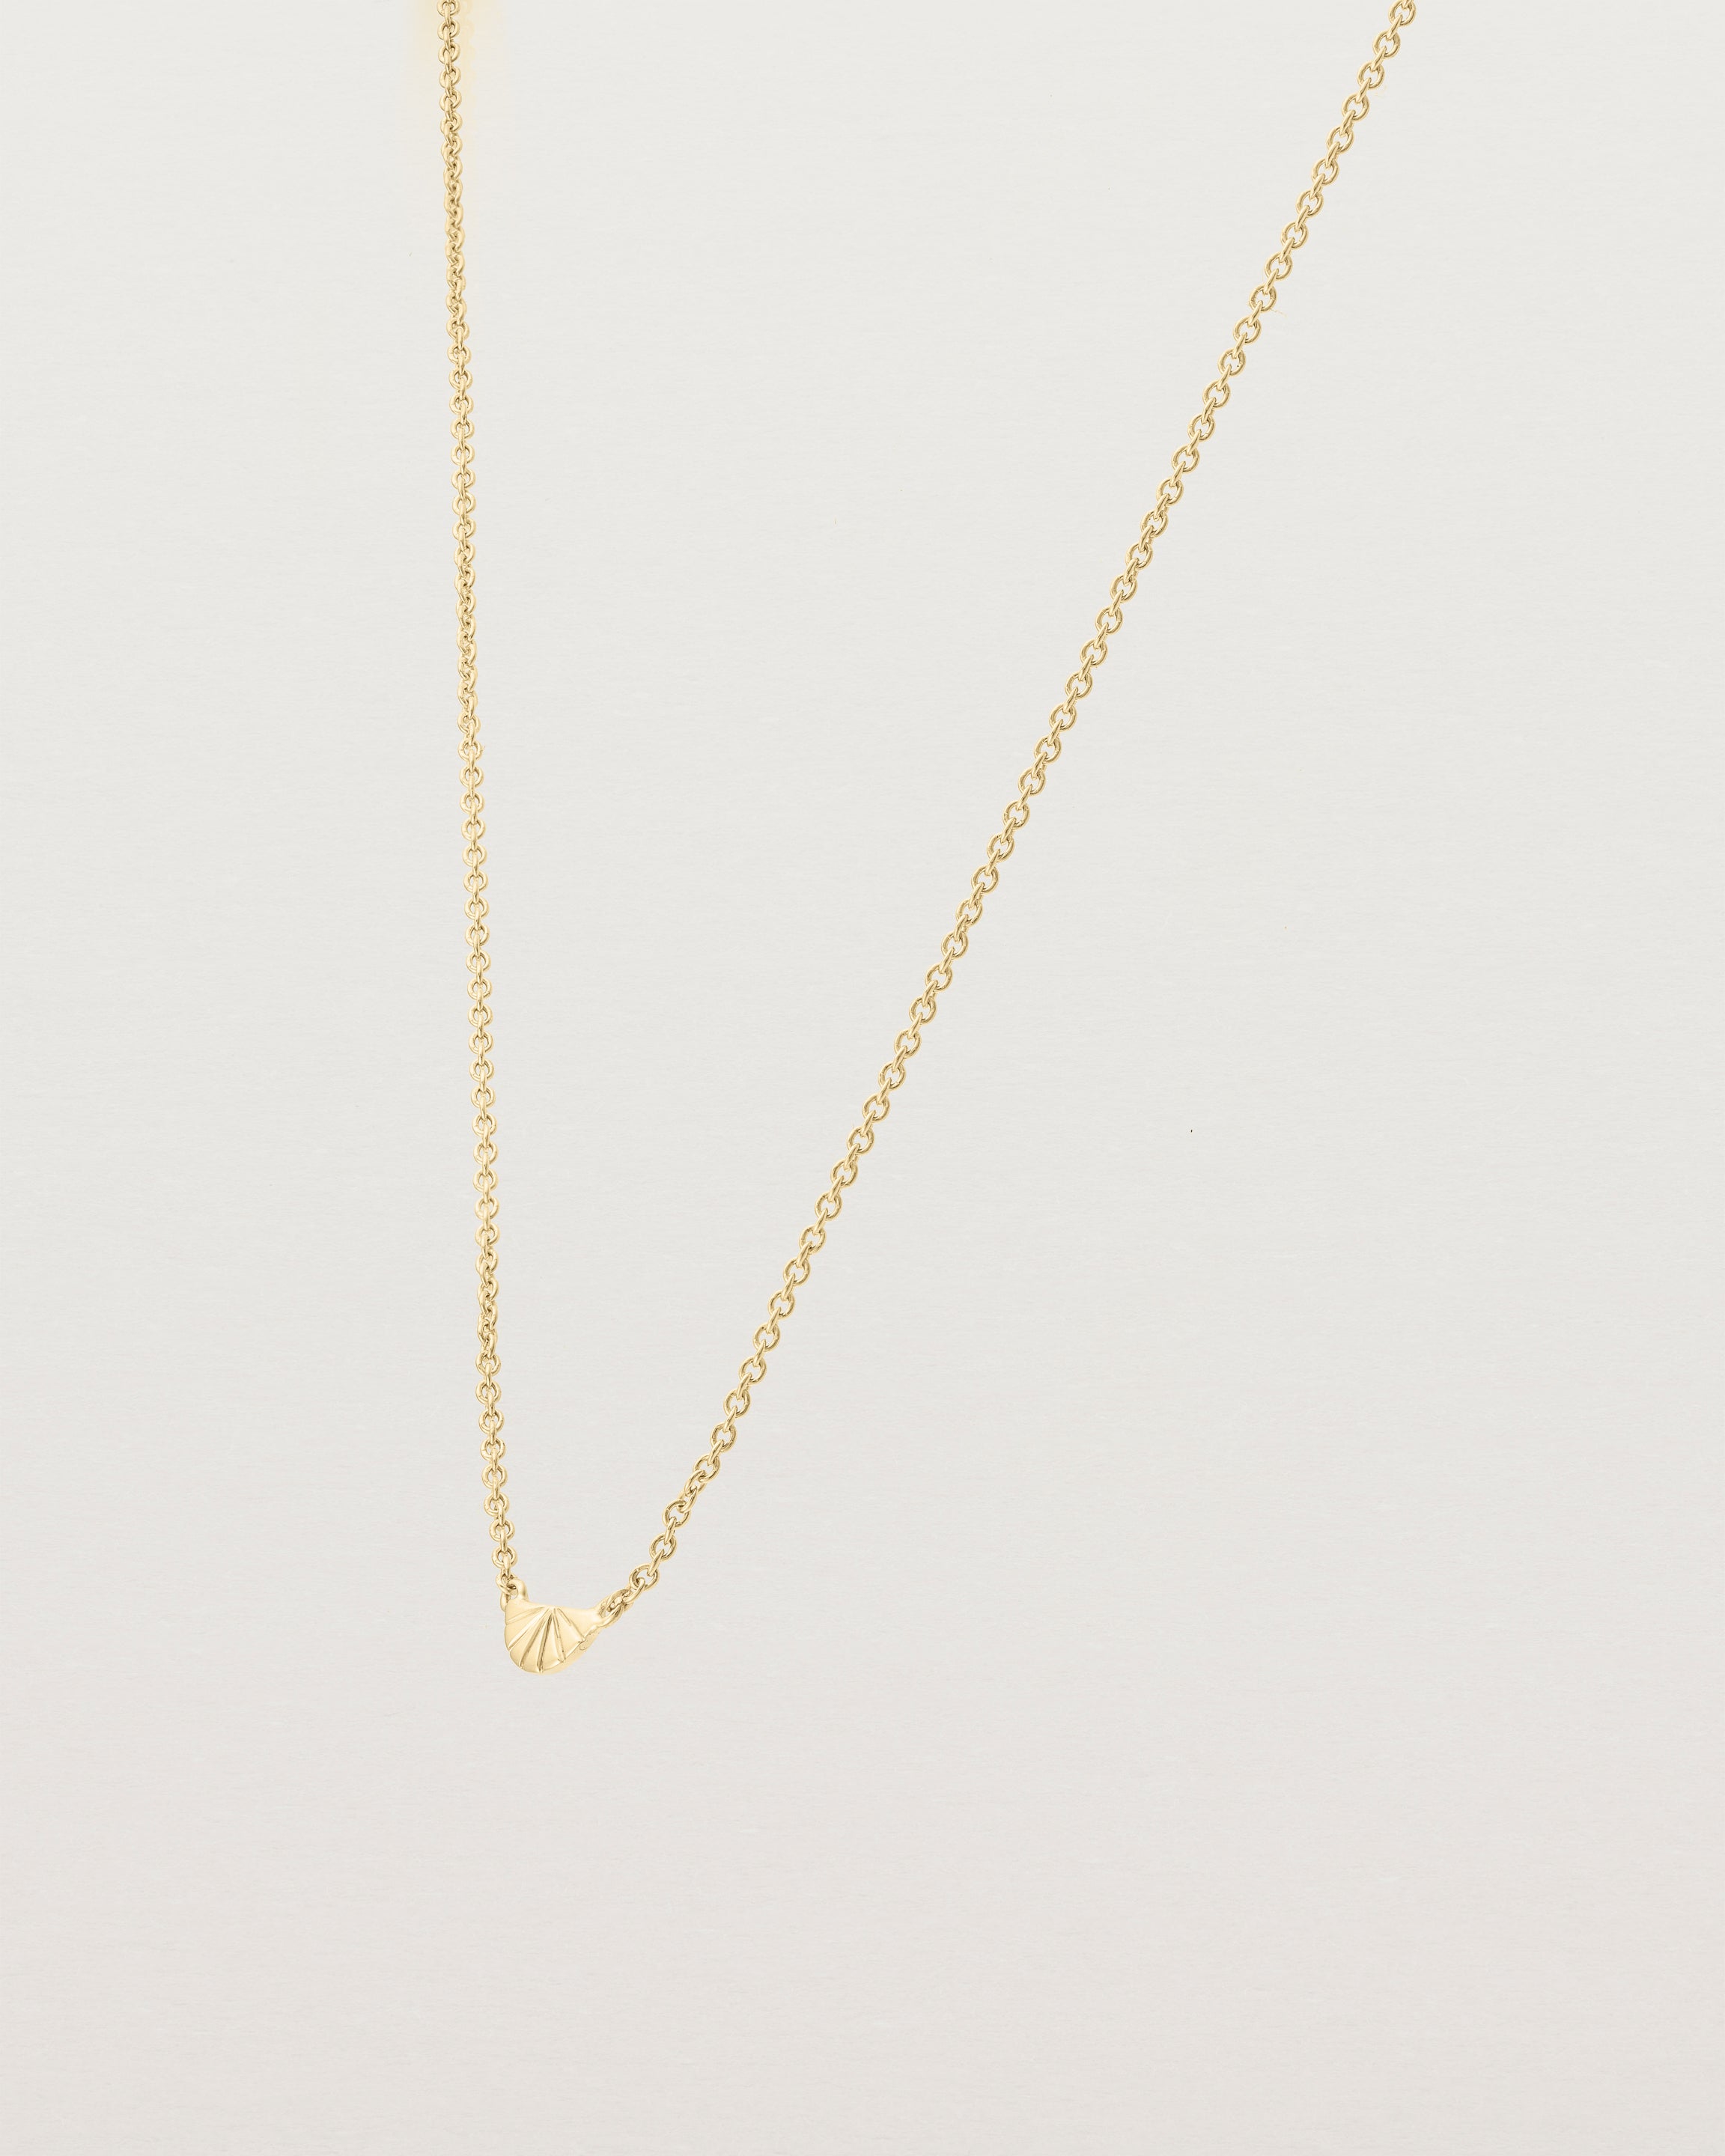 Angled view of the Jia Necklace in Yellow Gold.